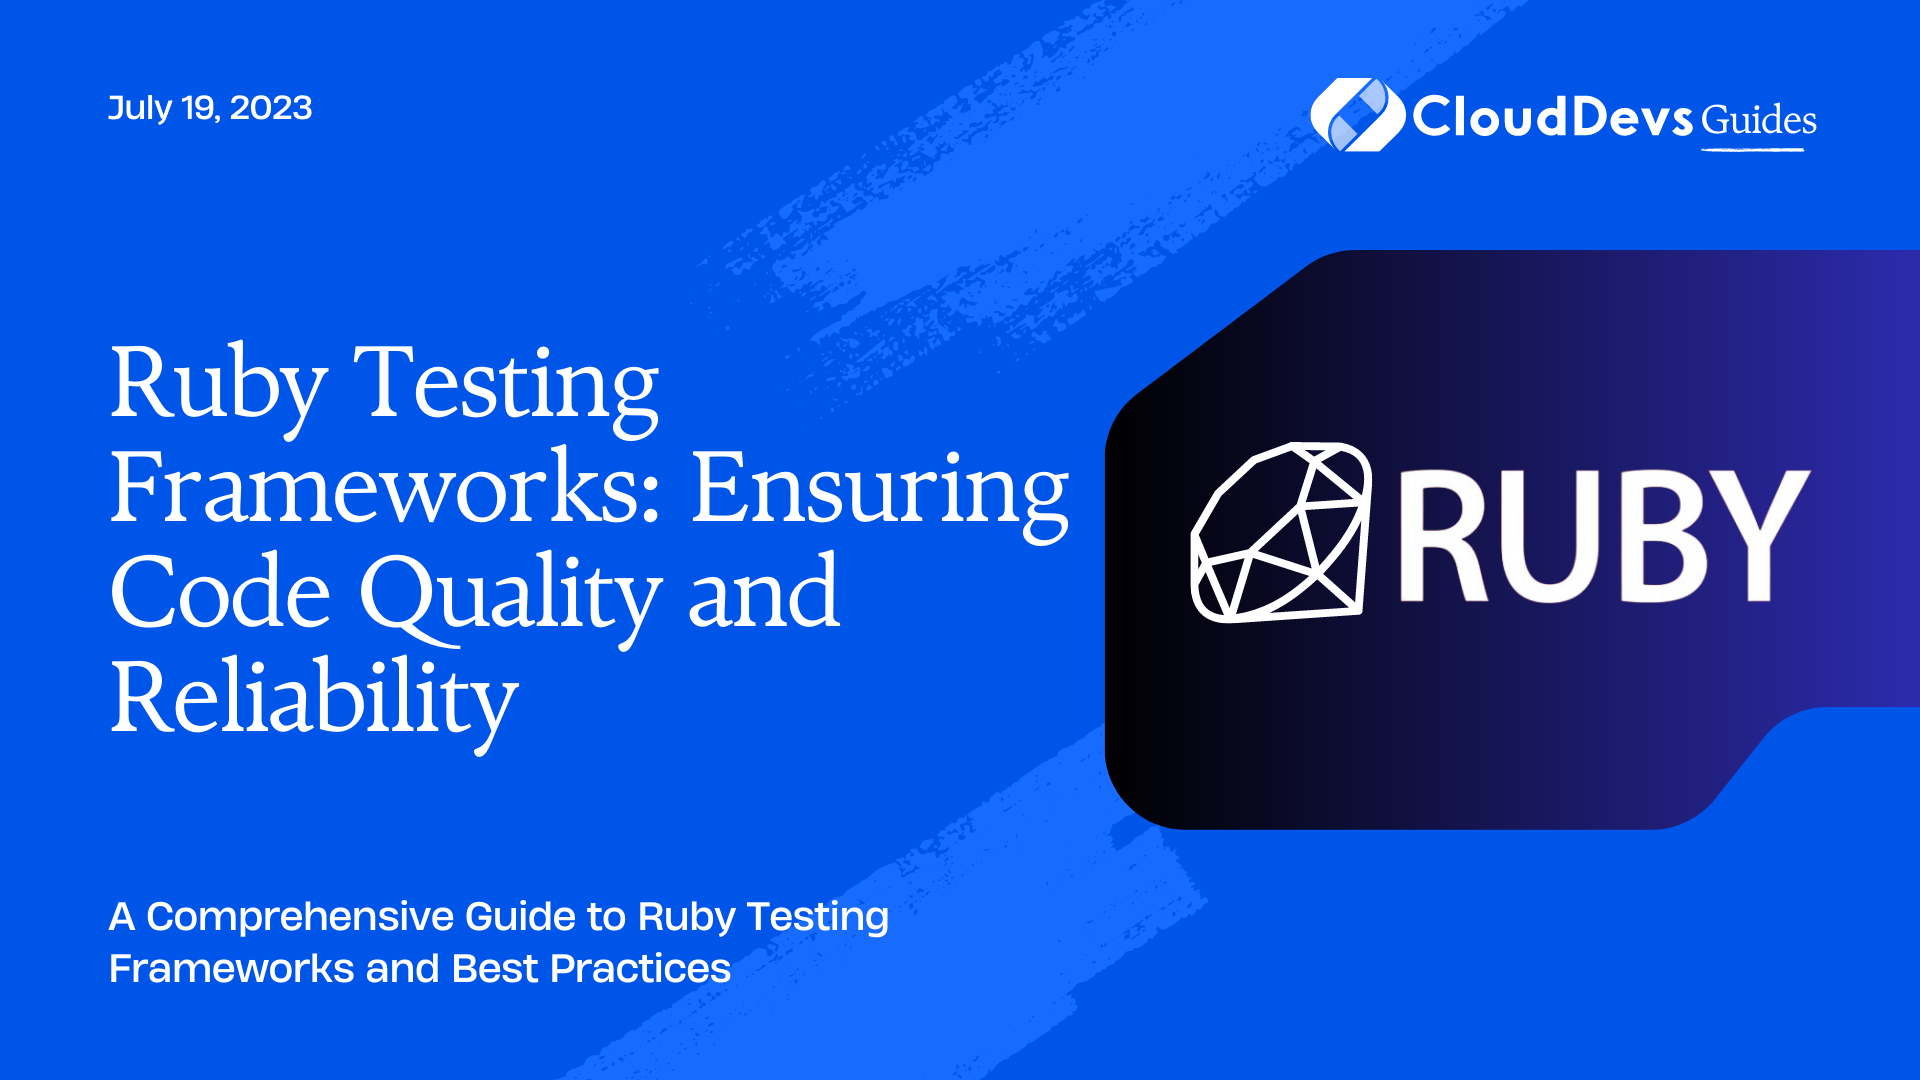 Ruby Testing Frameworks: Ensuring Code Quality and Reliability